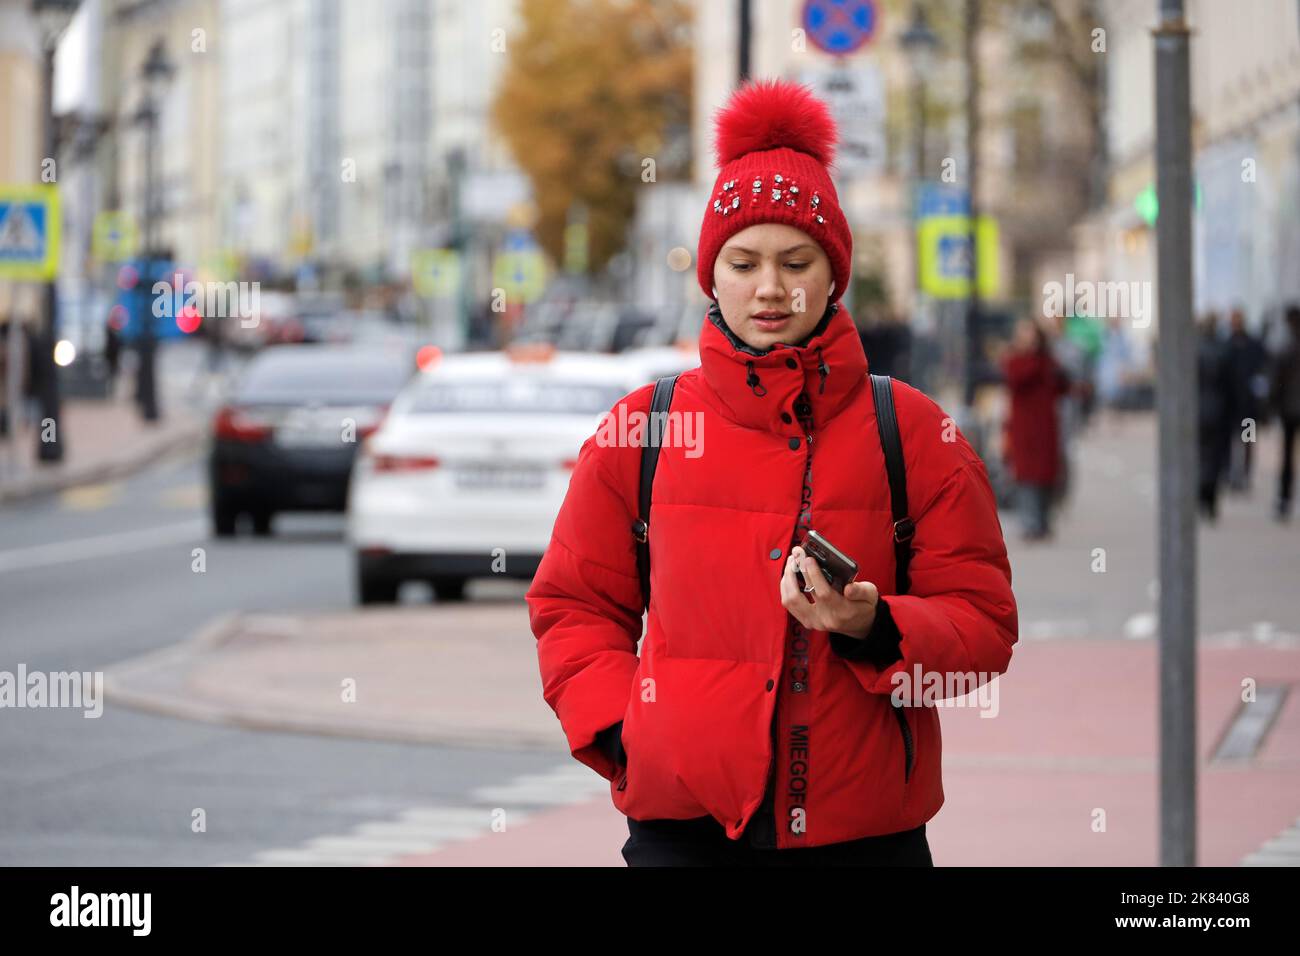 Girl in wireless headphones wearing red jacket and hat talking on smartphone while walking on a street. Using mobile phone in autumn city Stock Photo